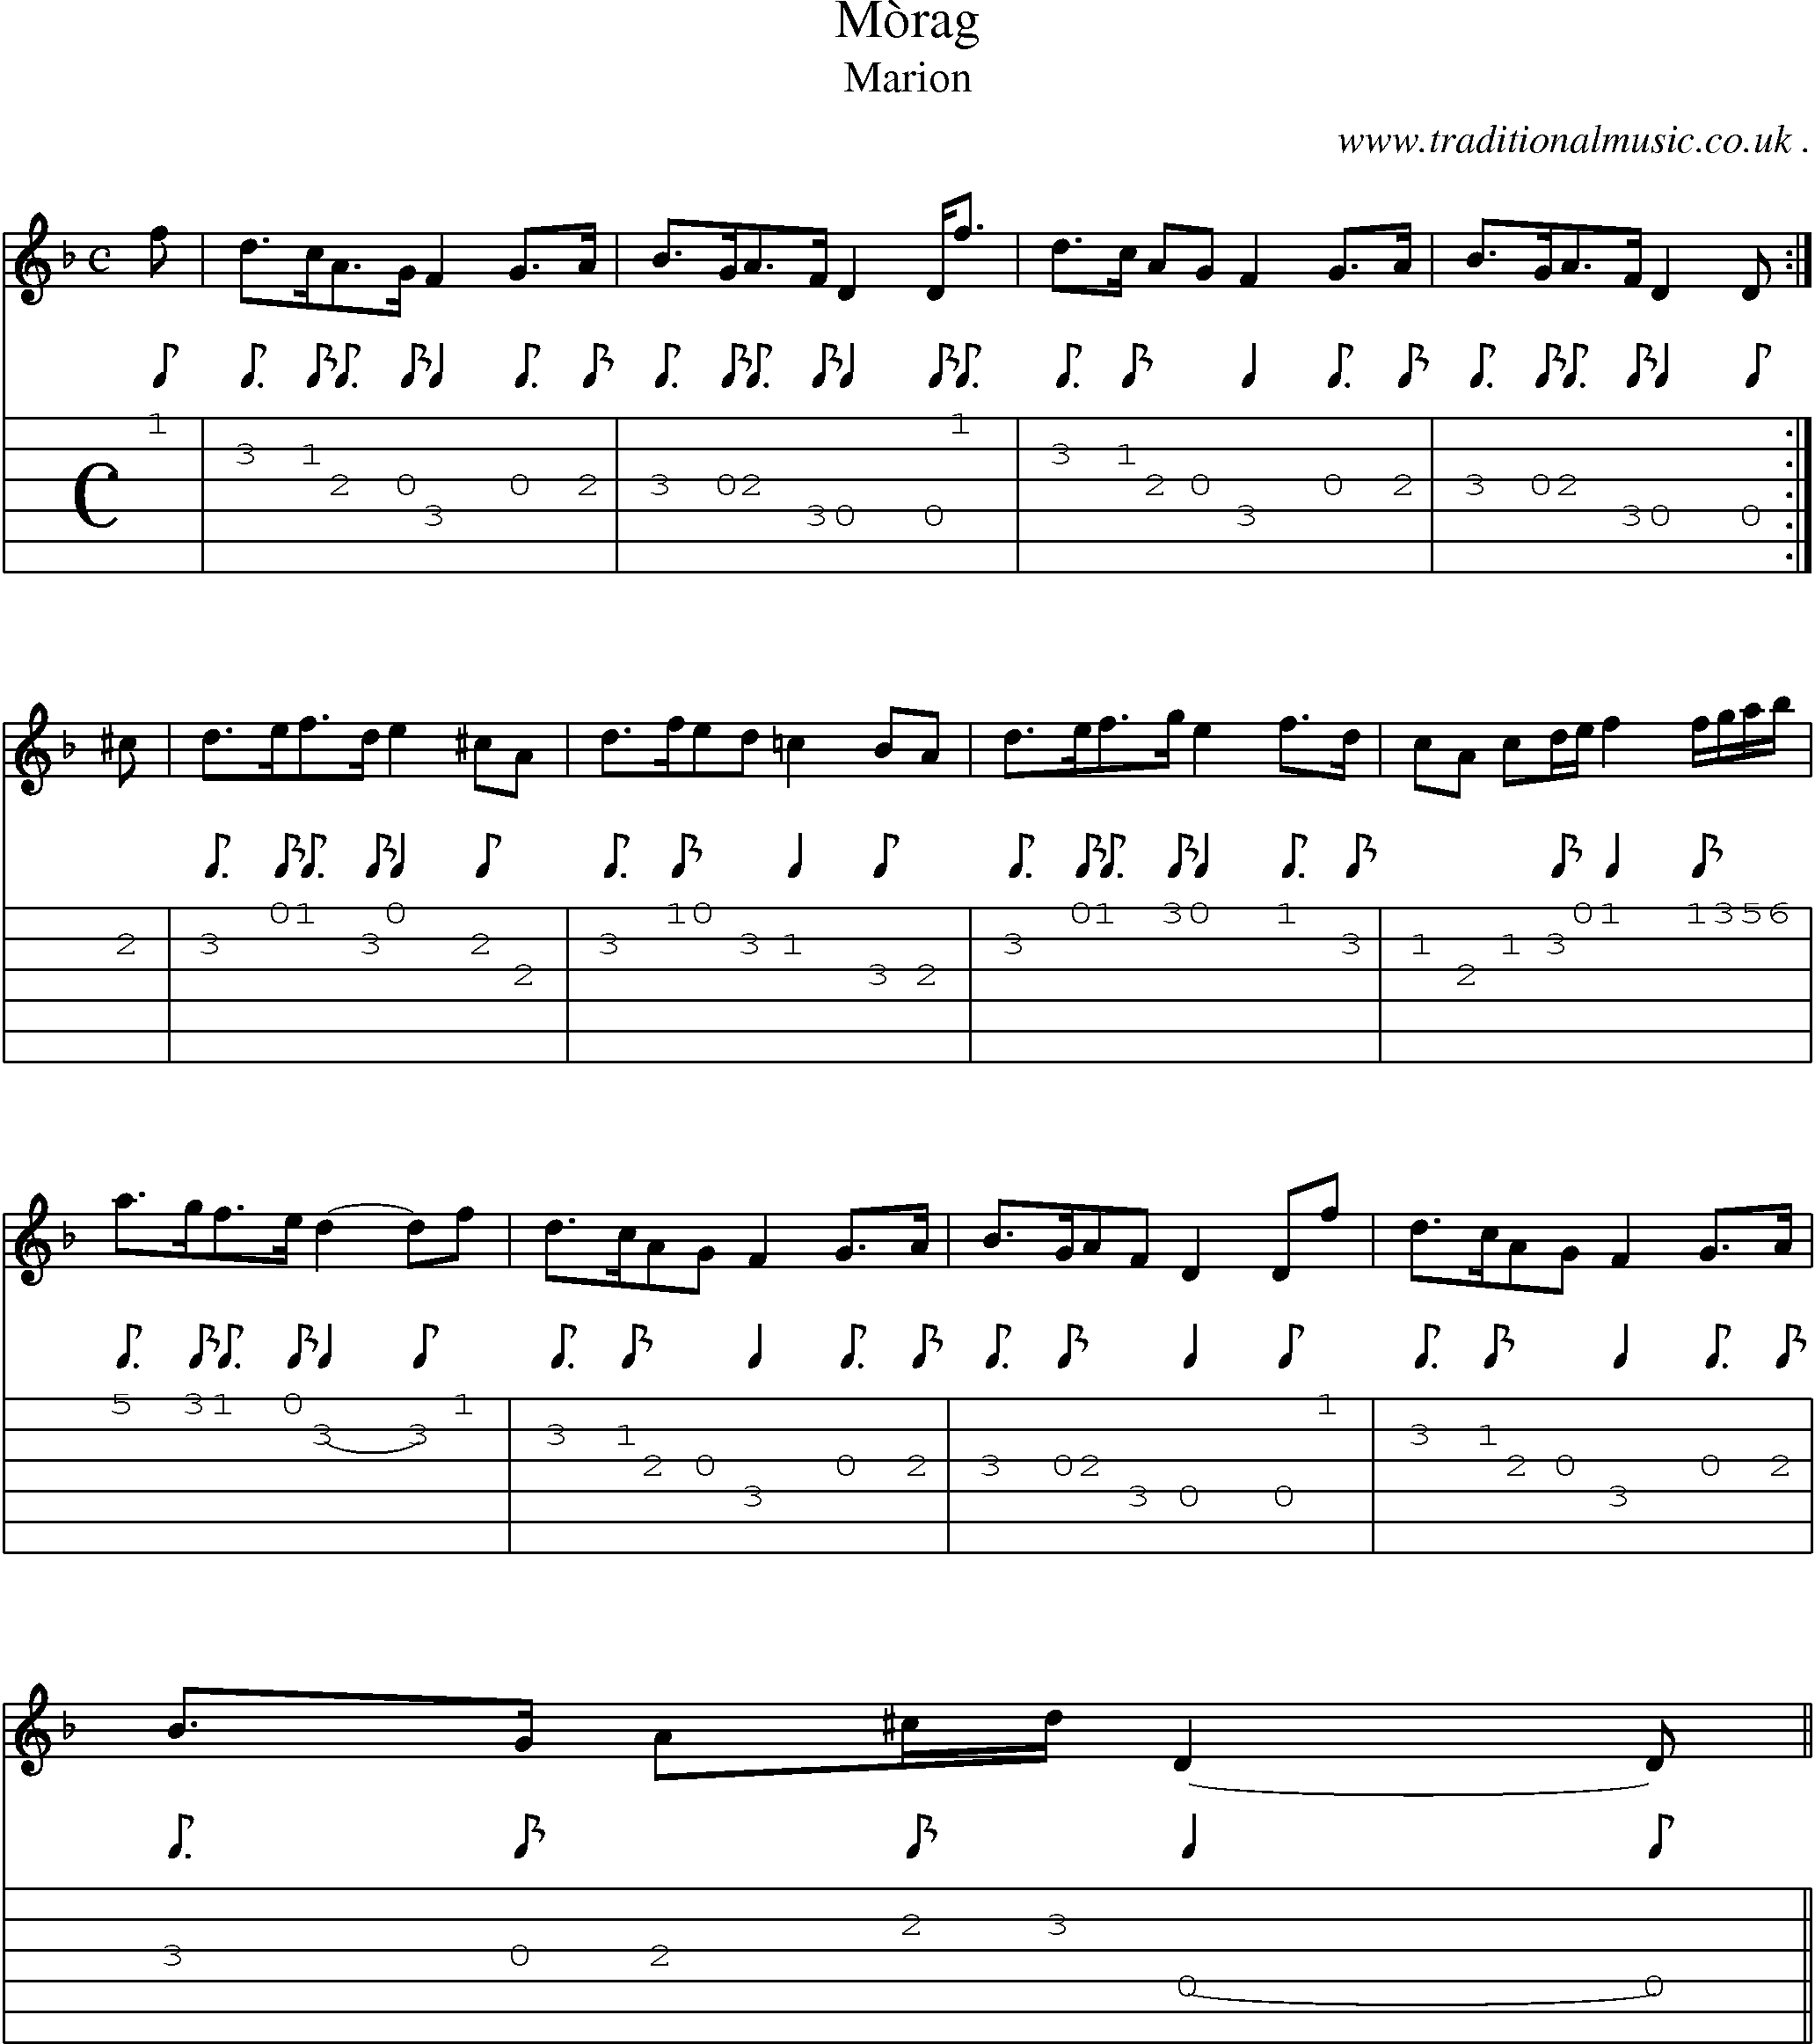 Sheet-music  score, Chords and Guitar Tabs for Morag